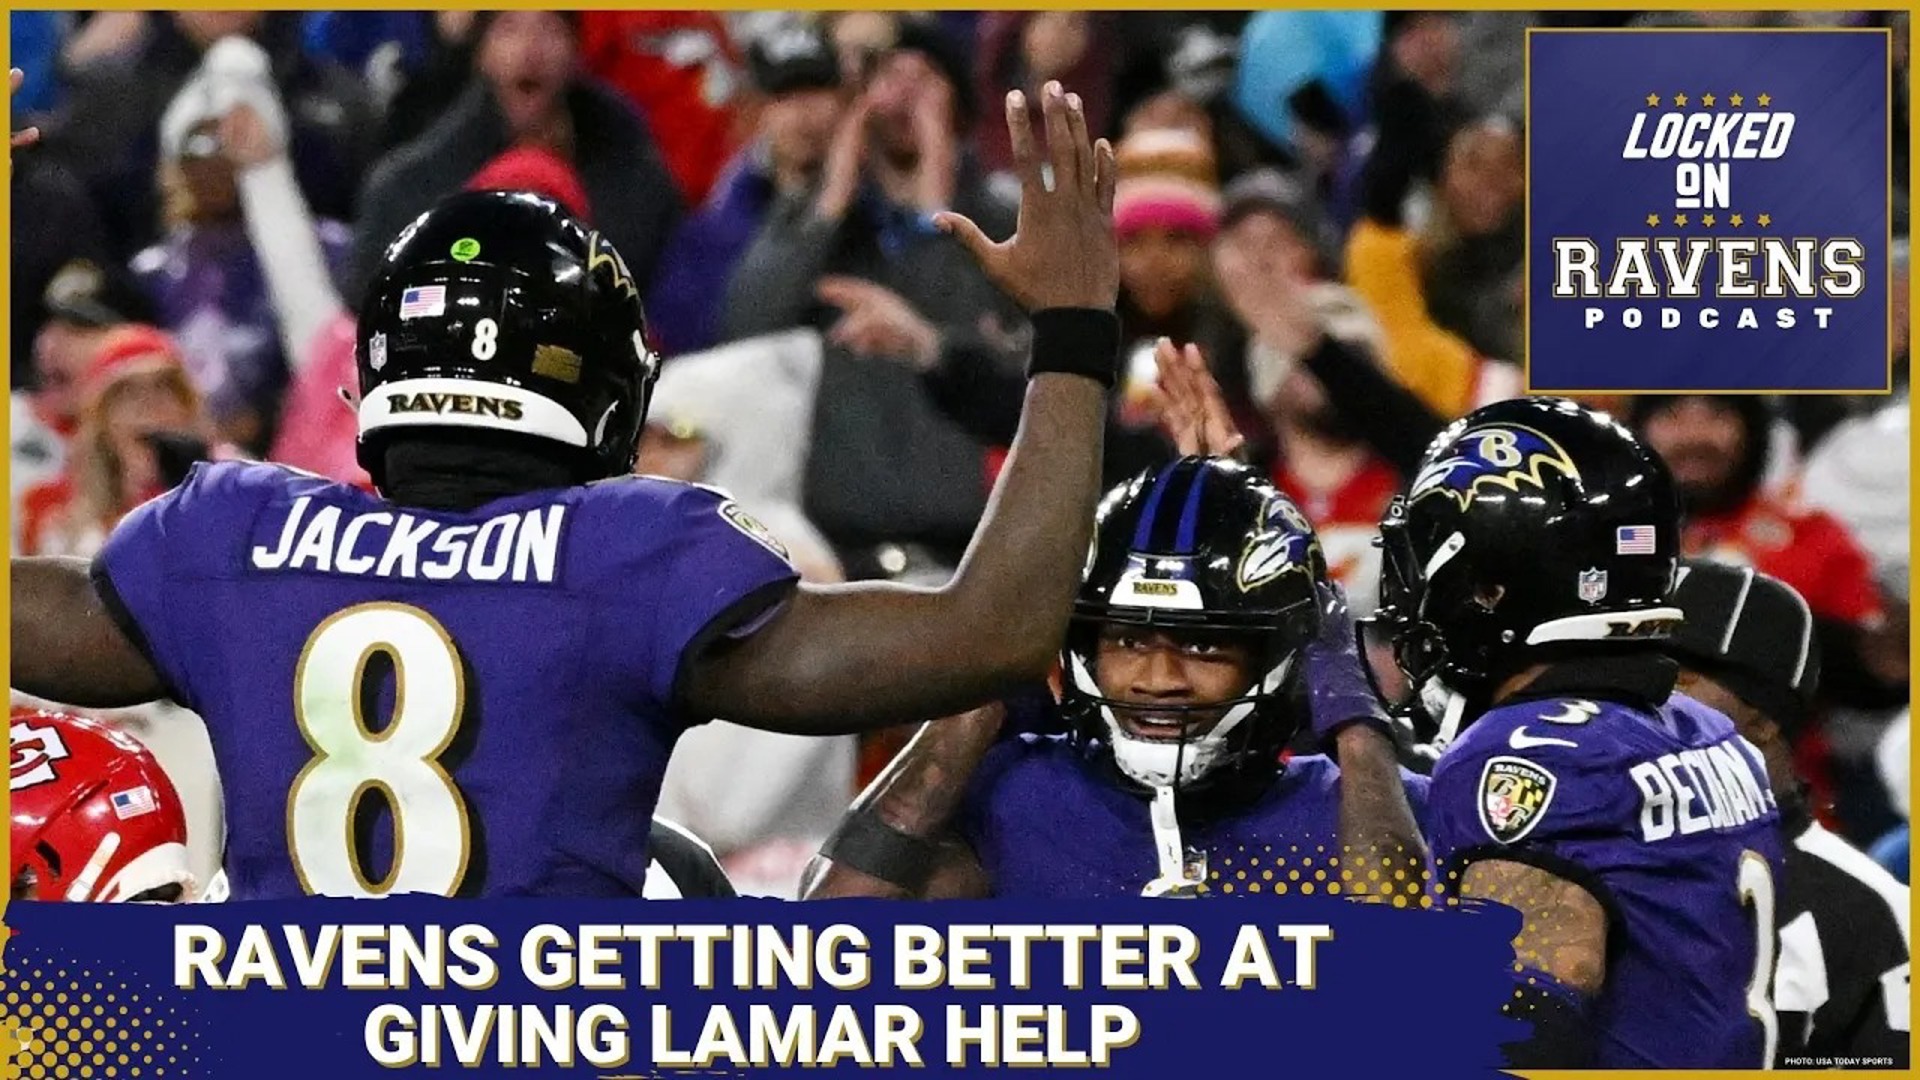 We look at how the Baltimore Ravens are moving in the right direction in getting Lamar Jackson weapons but still have work to do with Qadry Ismail.